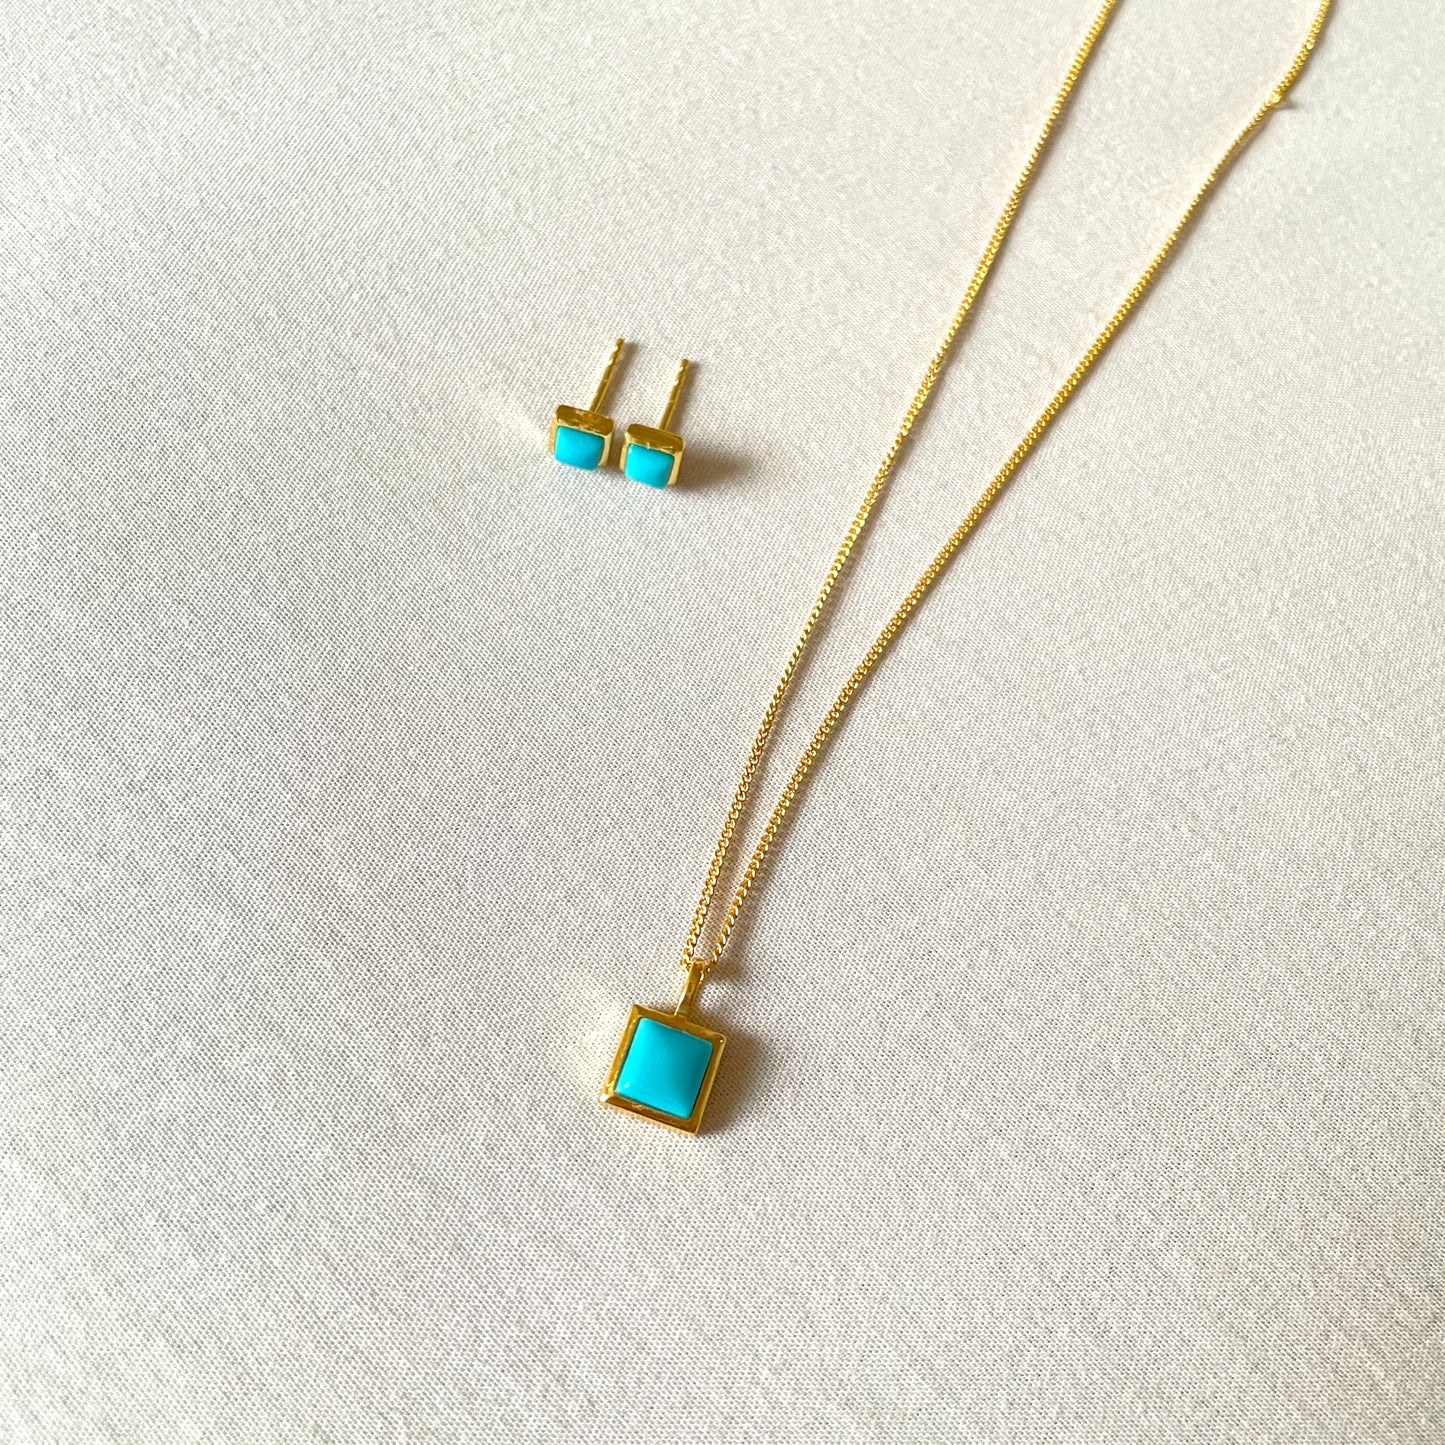 Turquoise Gold Necklace Gift set, Crystal gemstone necklace, Gold Plated on 925 Sterling Silver, handmade earrings, Turquoise necklace, Unique Gift, turquoise, gold studs, Crystal, Christmas gift ideas, small business, london, dainty necklace